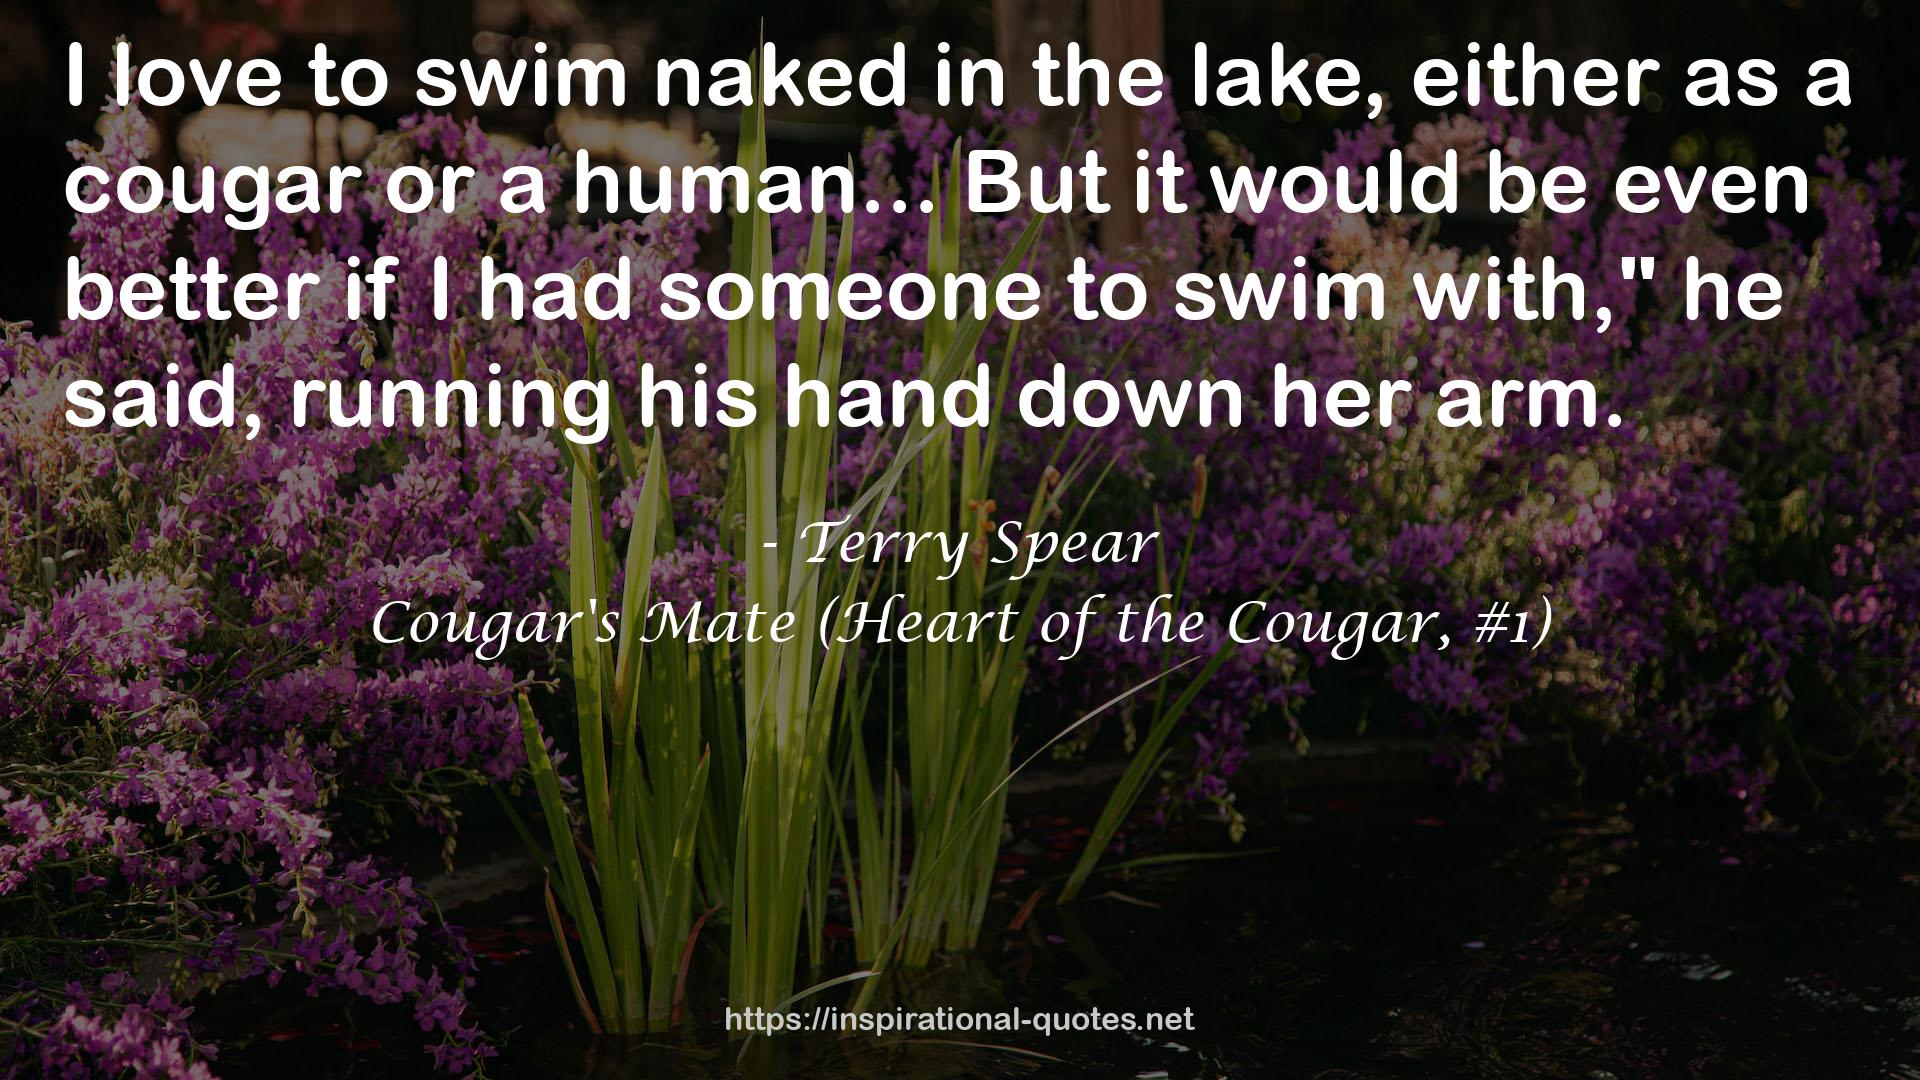 Terry Spear QUOTES